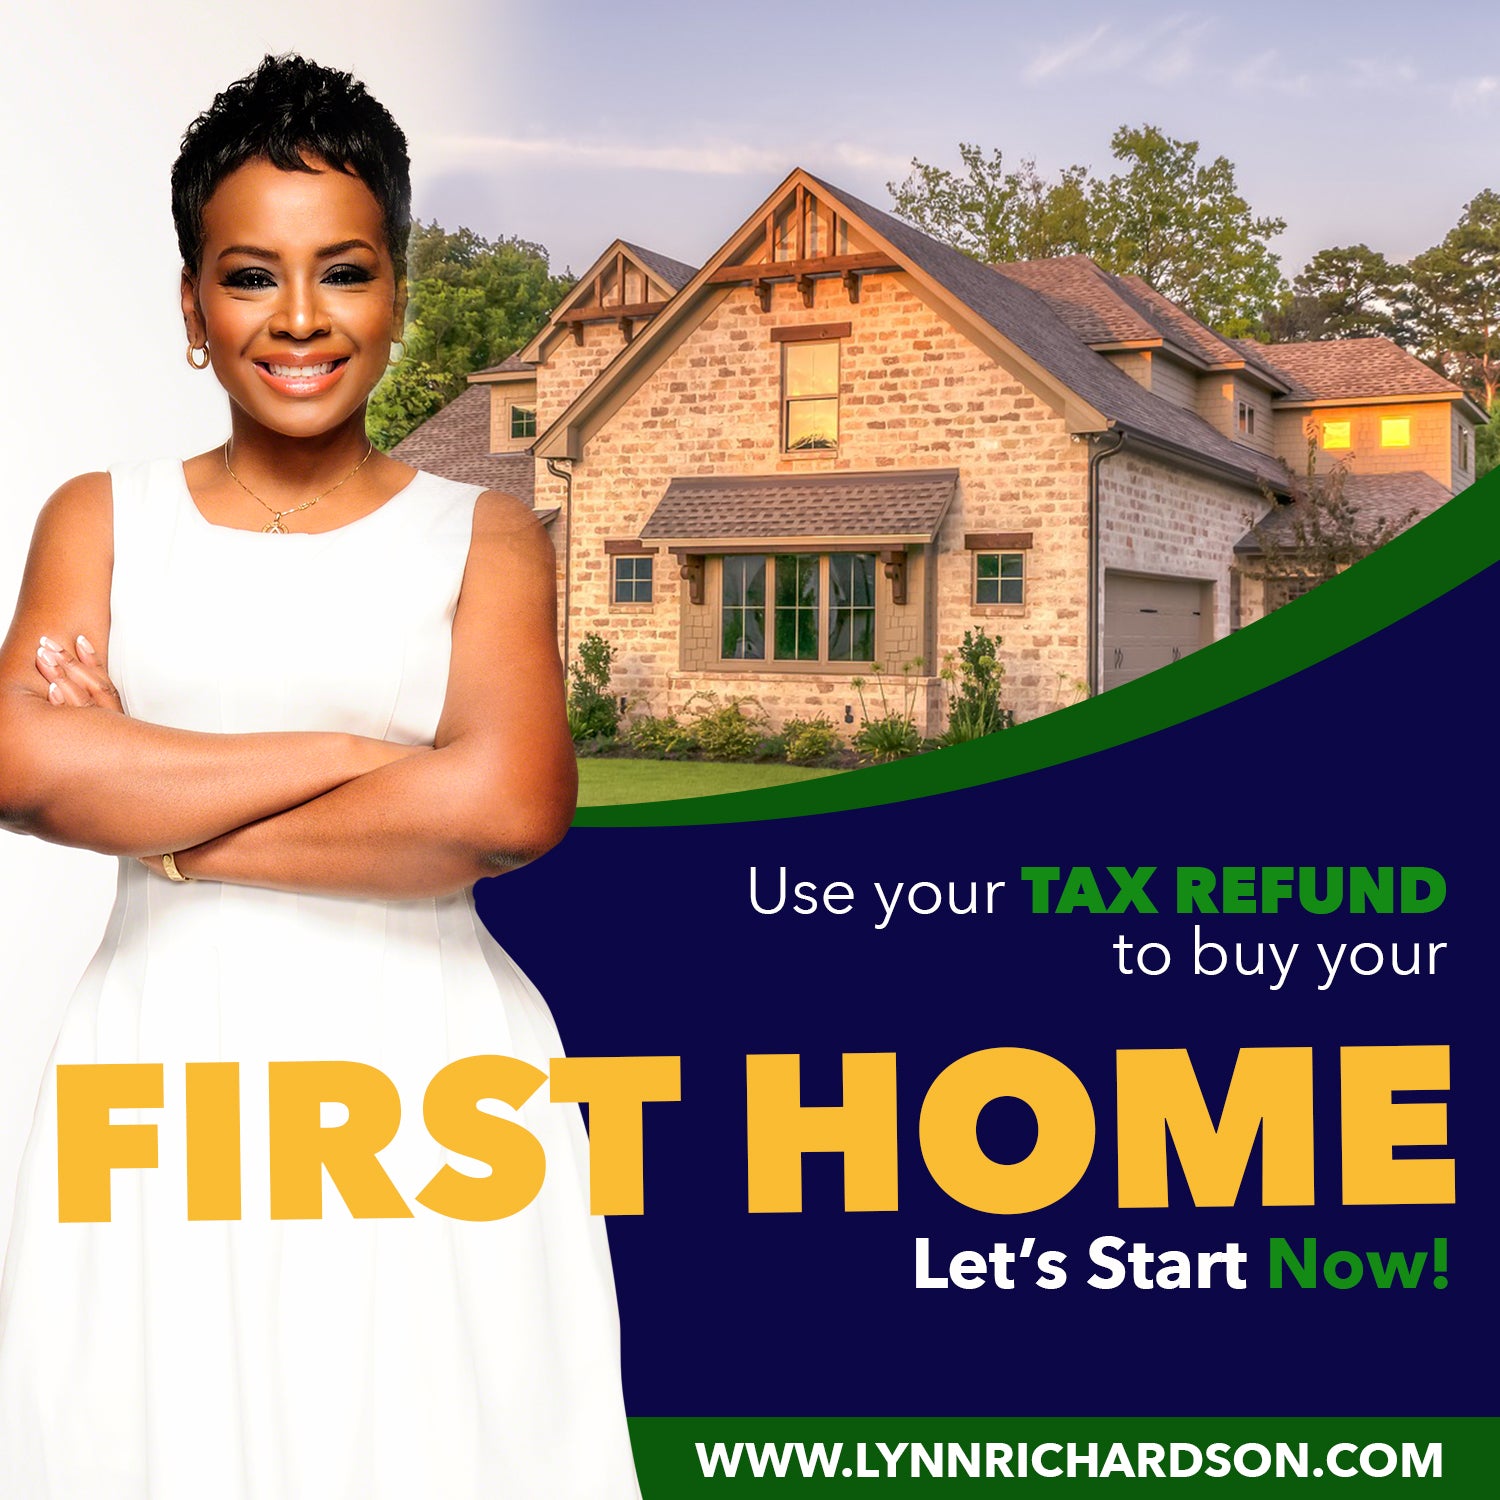 WEBINAR: The Road to Homeownership “How to Buy Your First or Next Home”